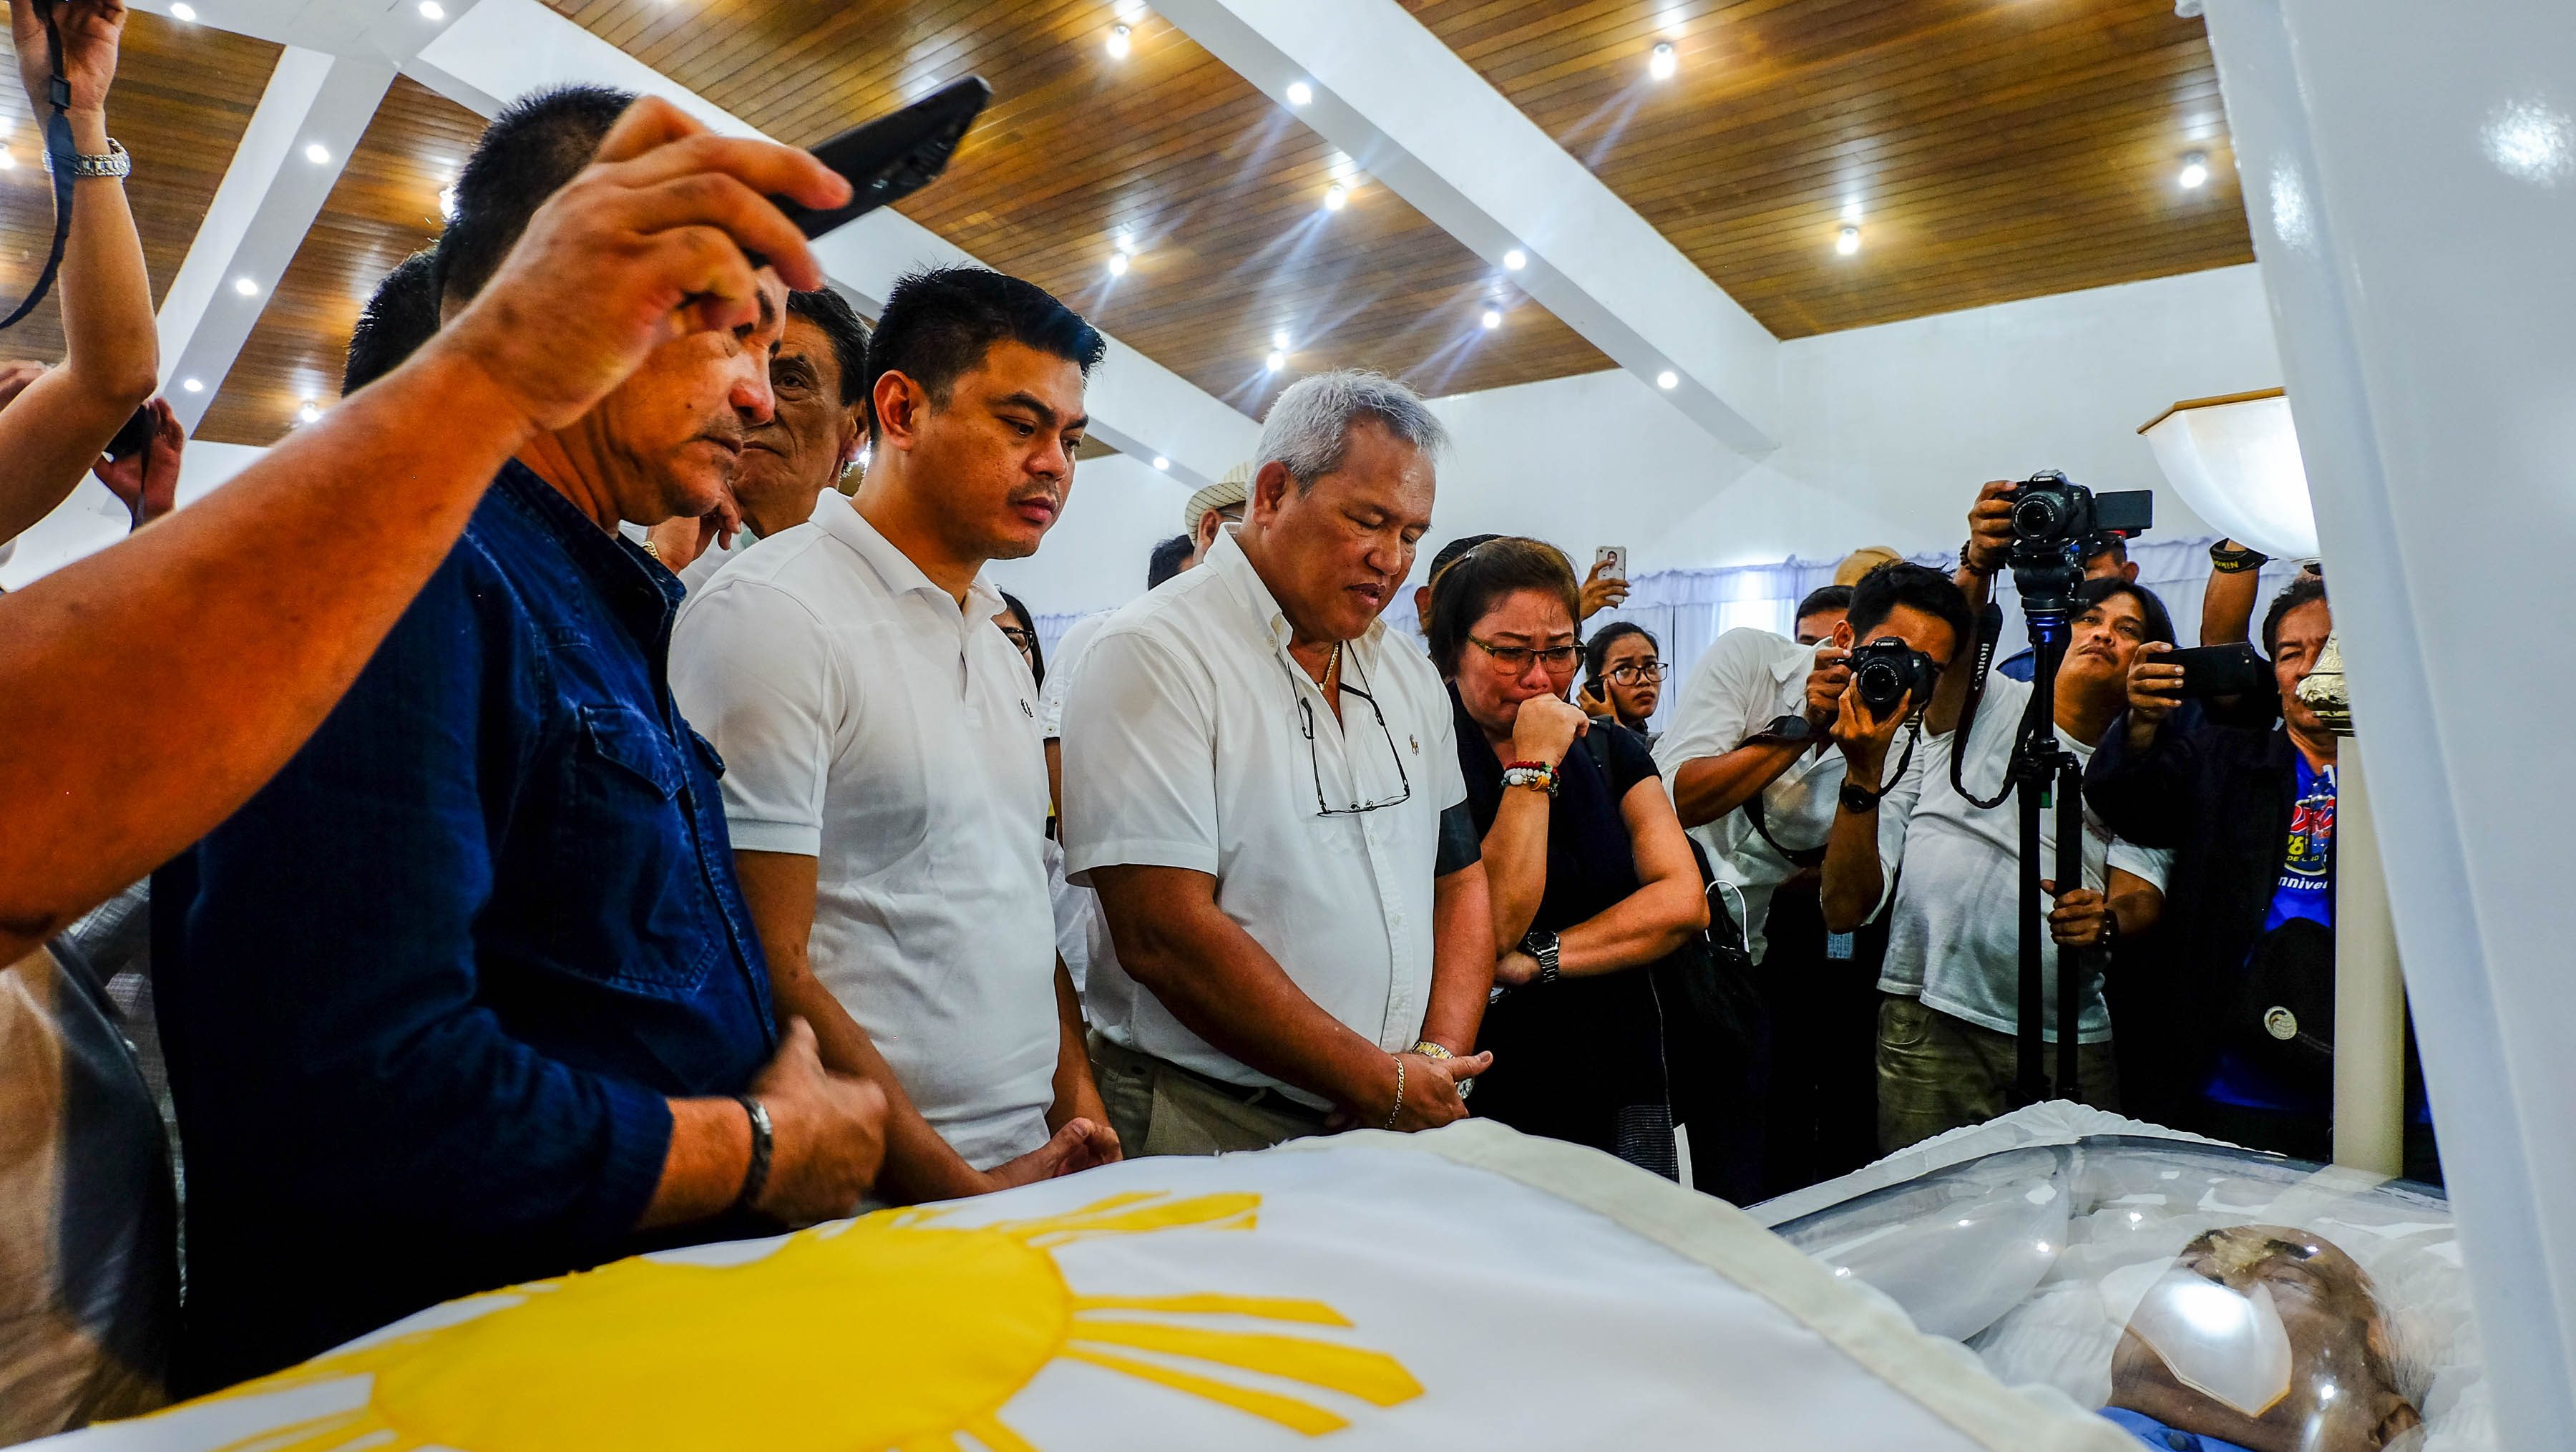 CAGAYAN DE ORO'S SON. Cty officials pay their respects to former Senate president Aquilino PImentel III, including Mayor Oscar Moreno (3rd from left) and Vice mayor Rainier Joaquin Uy to his right. Photo by Bobby Lagsa/Rappler 